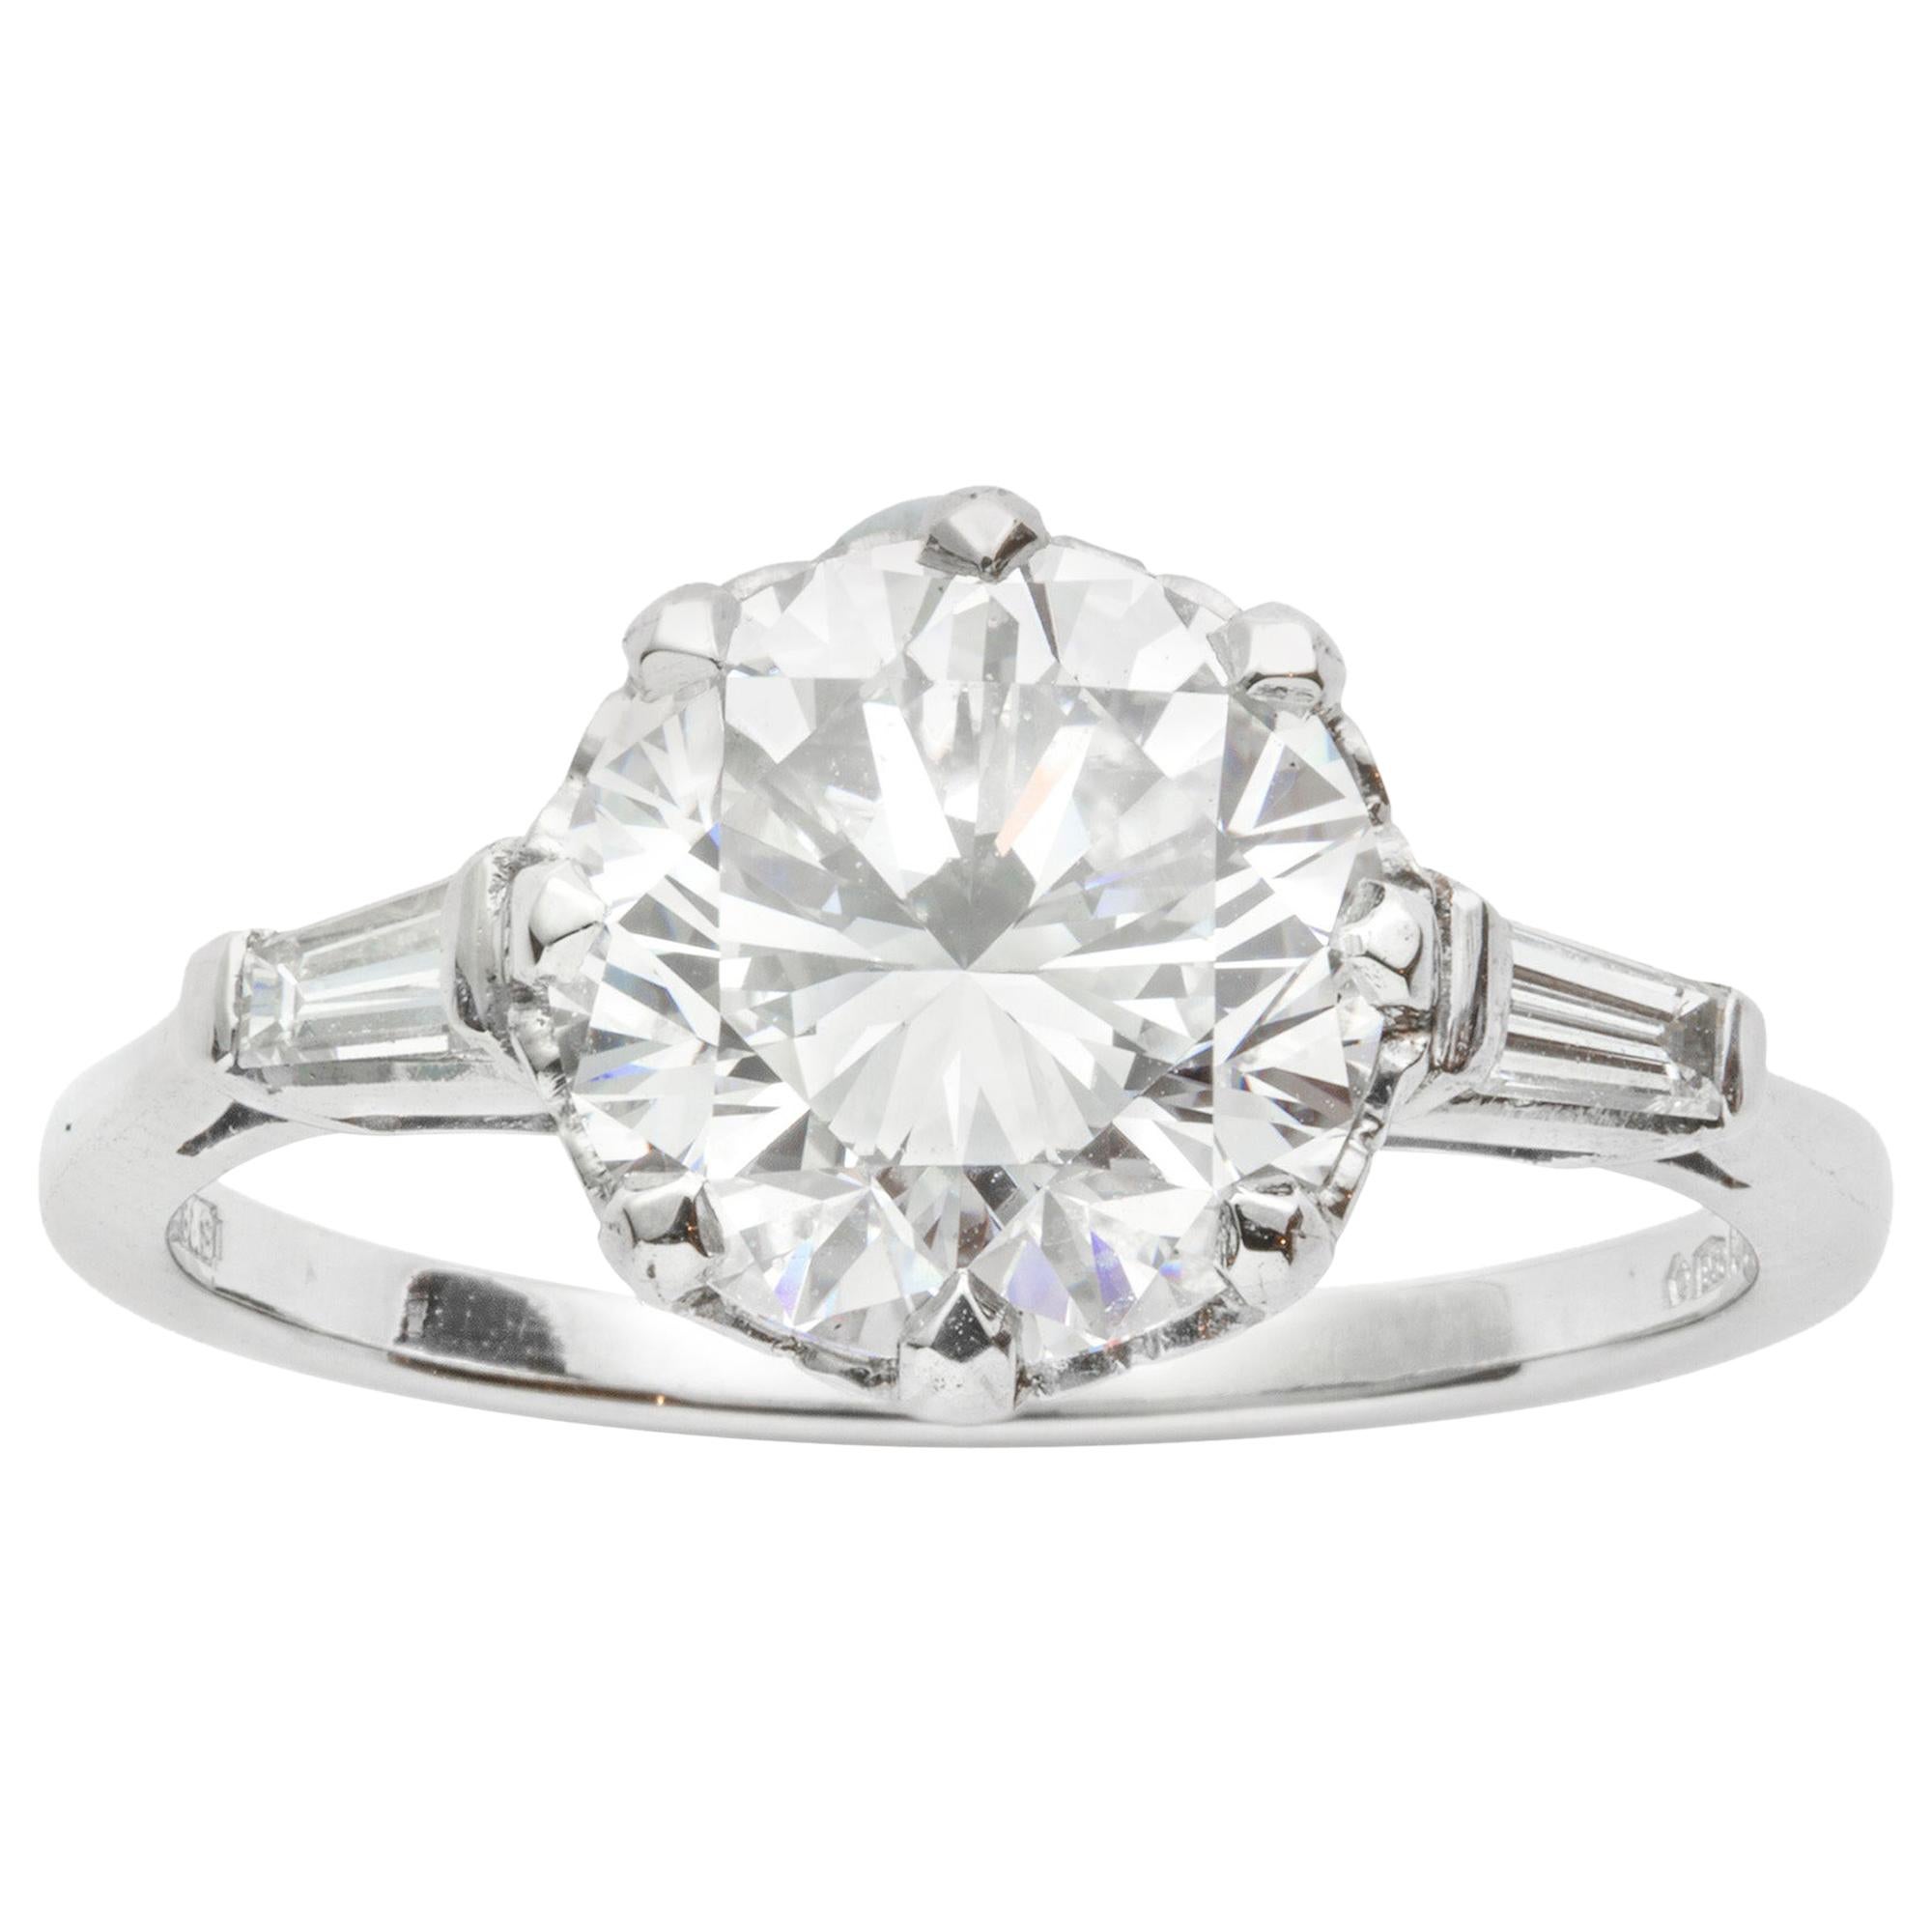 GIA Certified 3.19 Carat Solitaire Diamond Ring For Sale